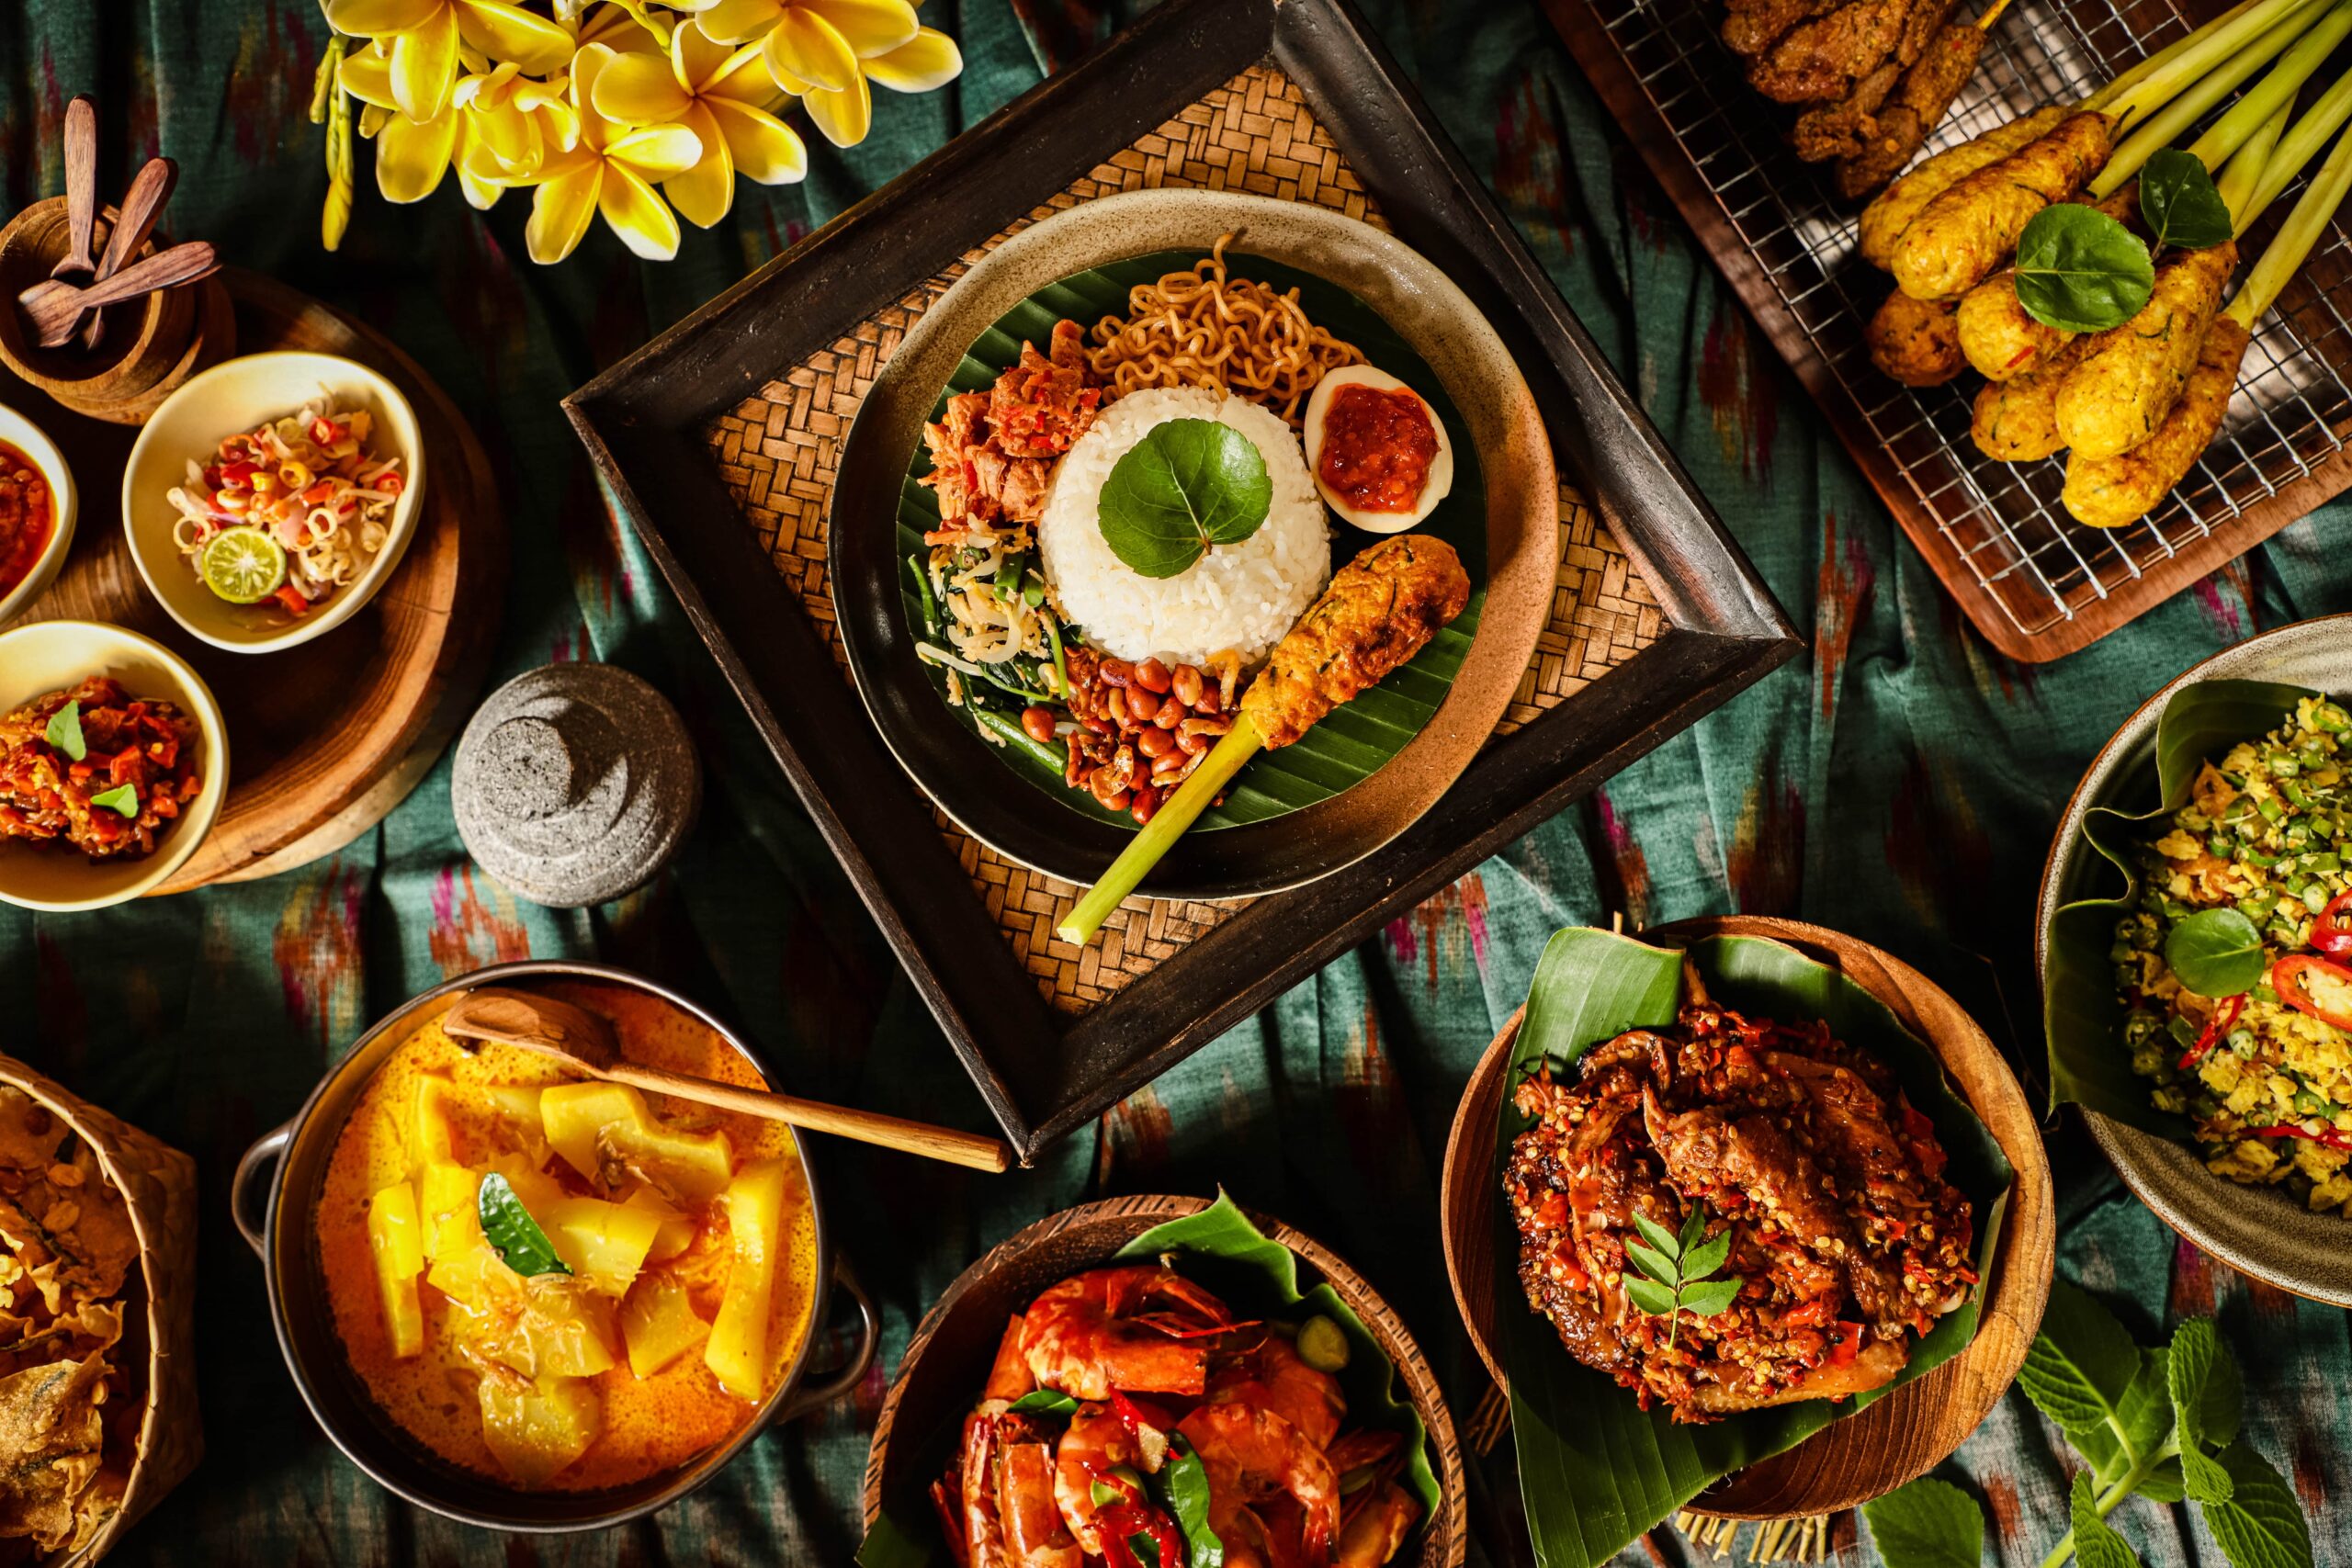 Hilton Manila brings back Four Hands Culinary Series featuring Balinese cuisine